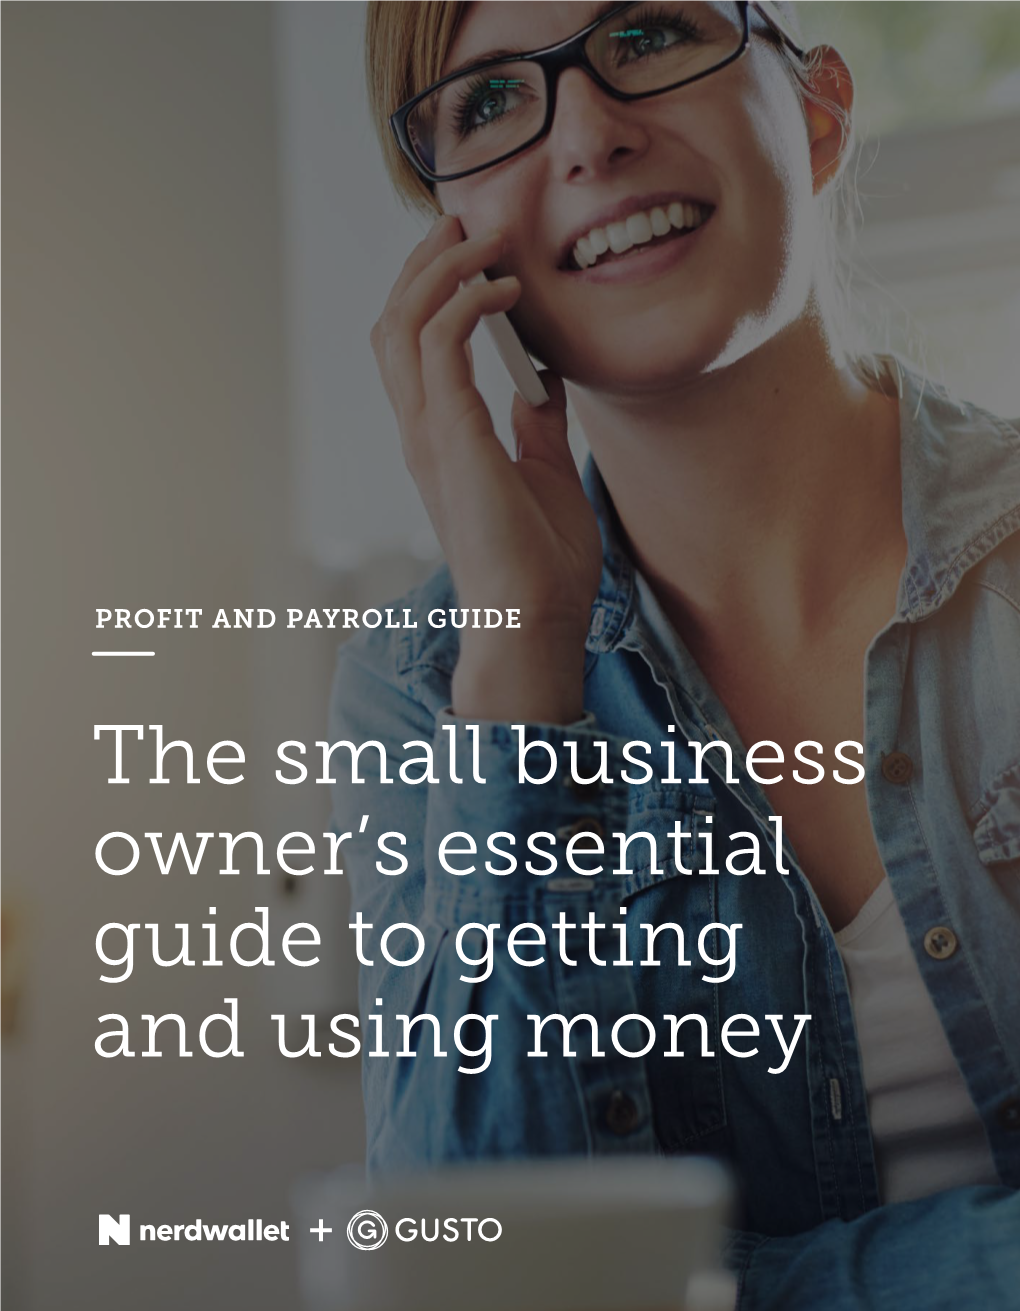 The Small Business Owner's Essential Guide to Getting and Using Money